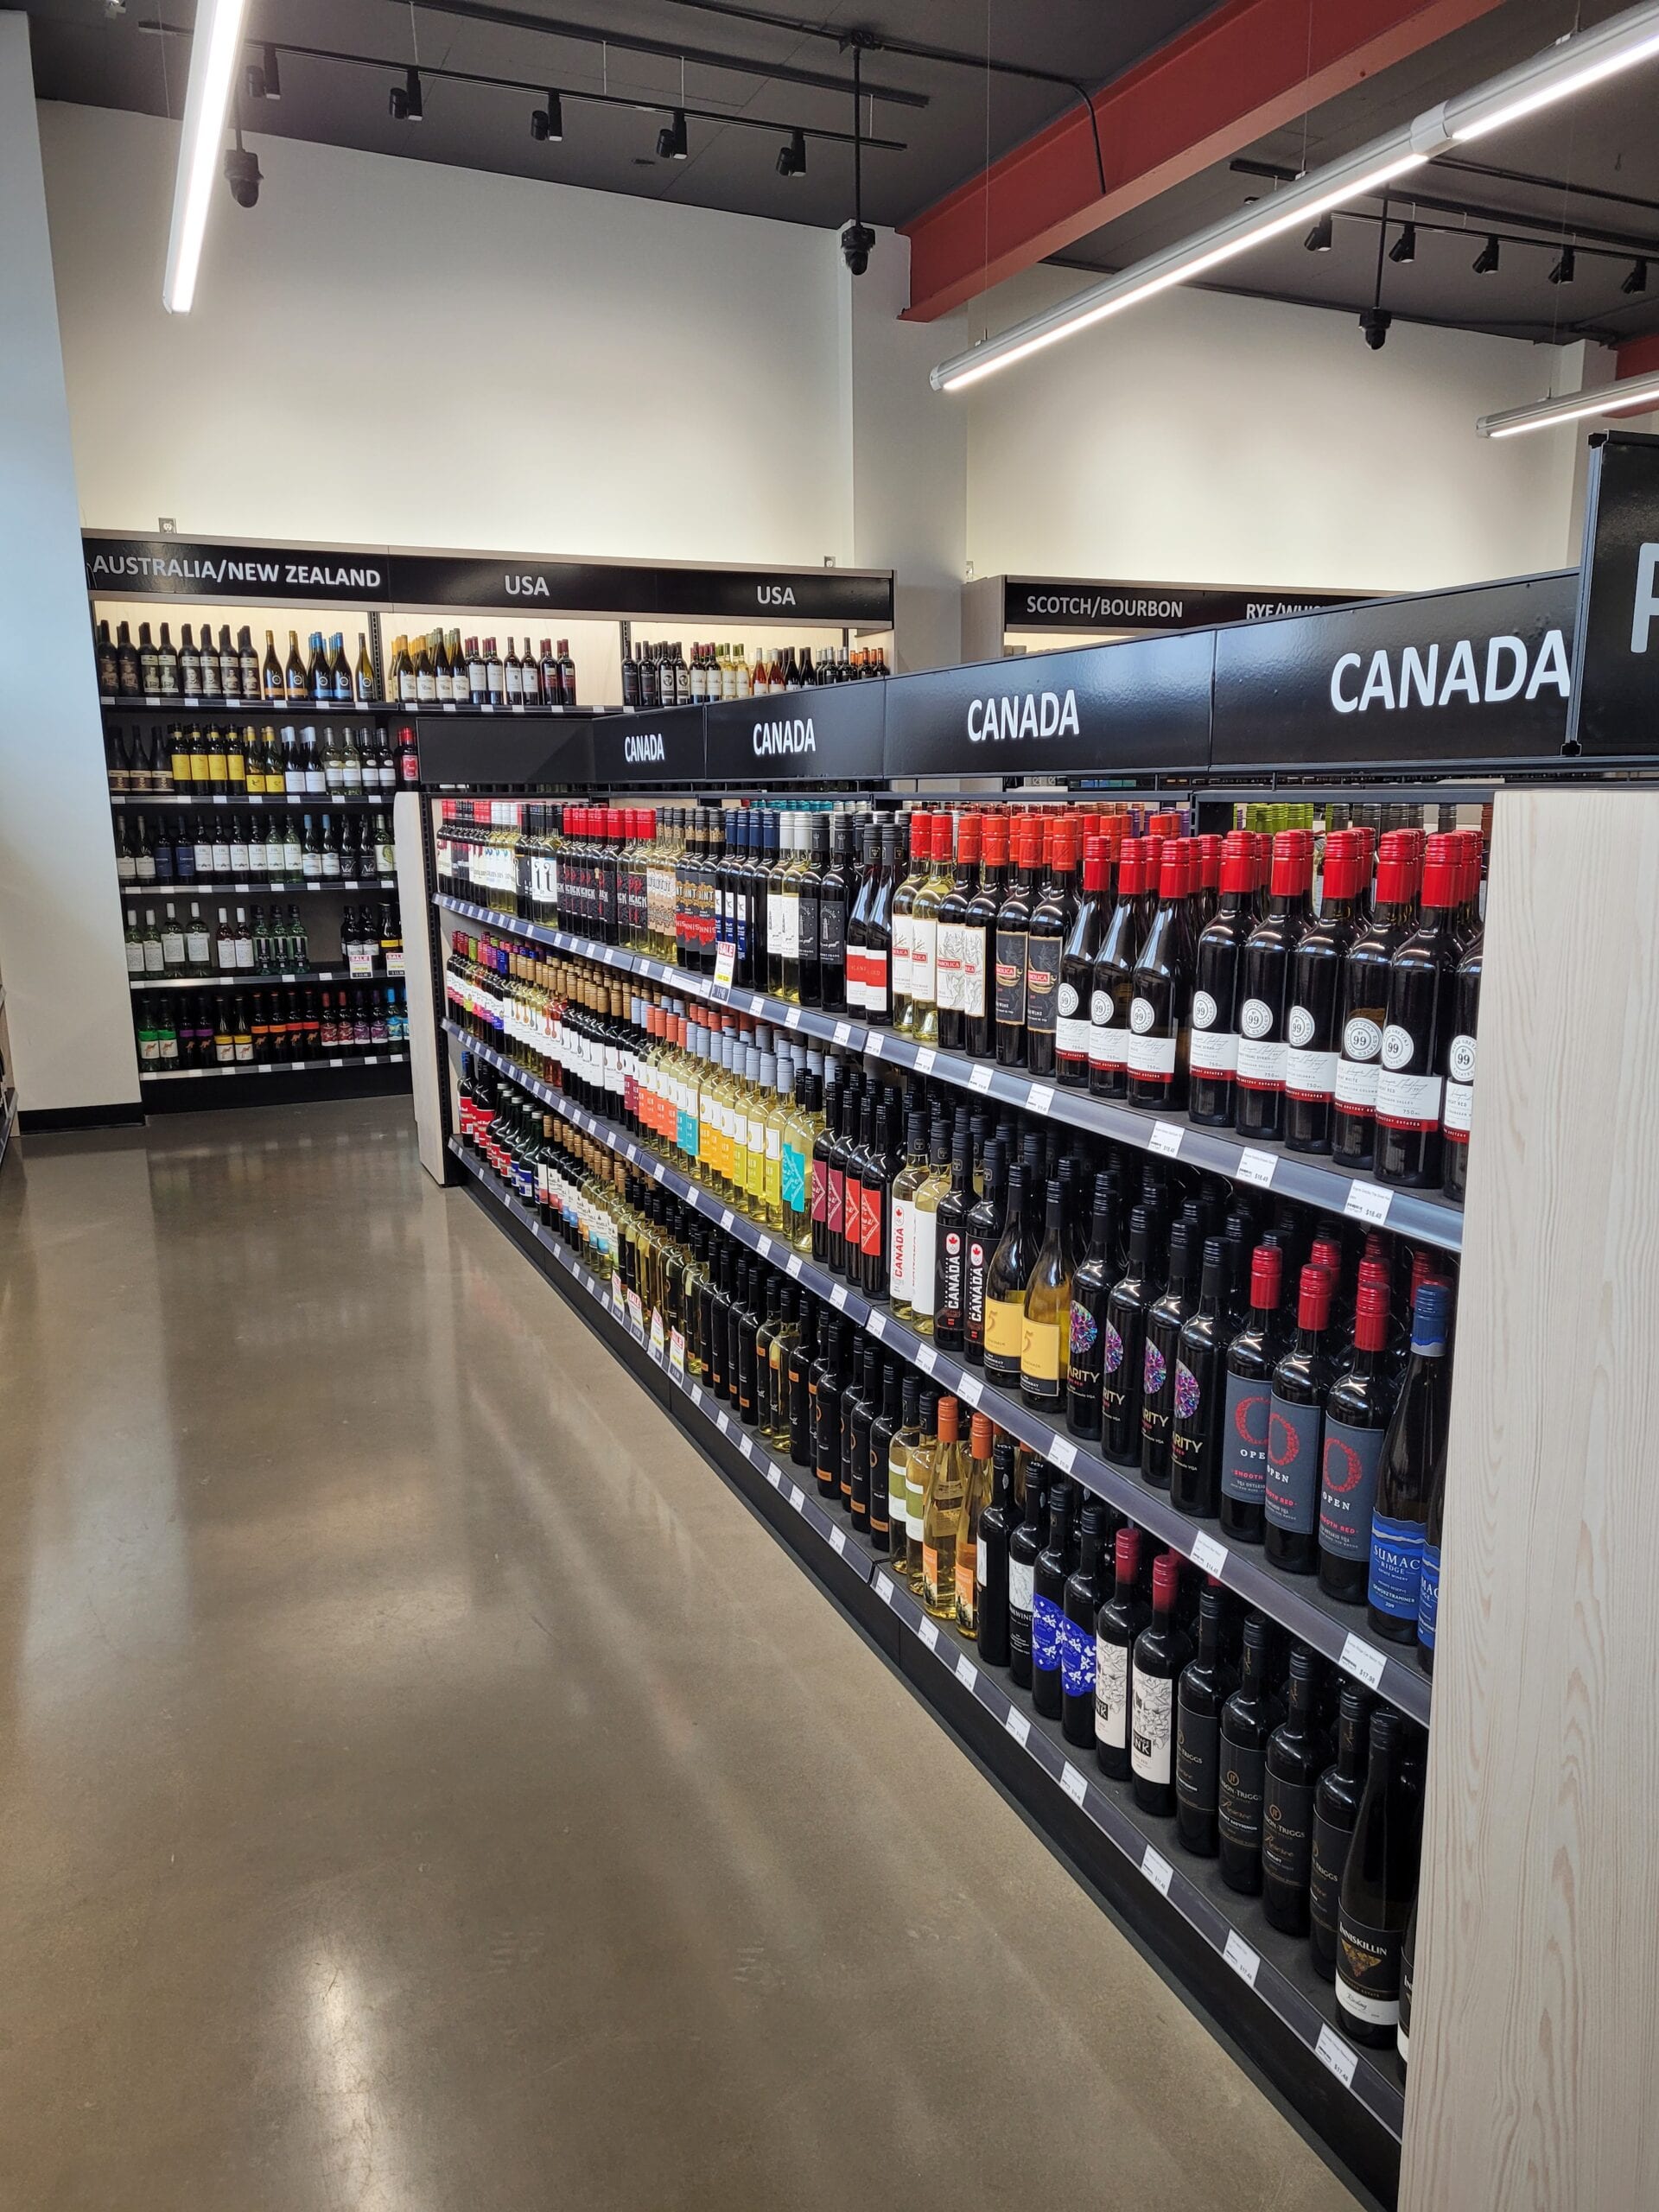 Canadian wines